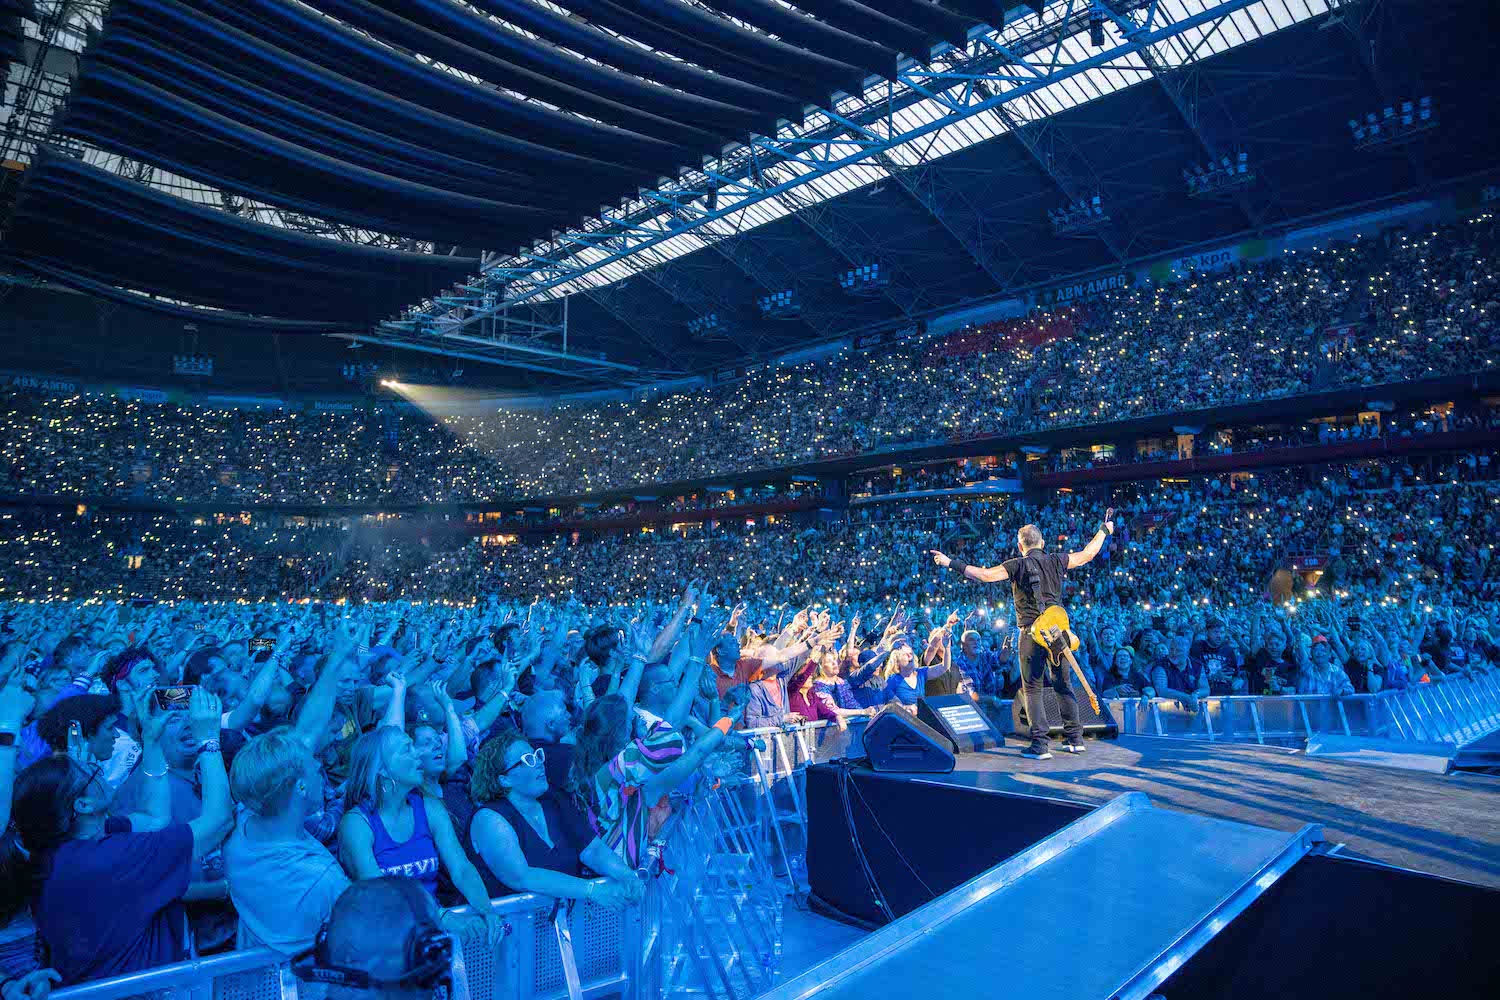 Bruce Springsteen & E Street Band at Johan Cruijff ArenA, Amsterdam, The Netherlands on May 25, 2023.